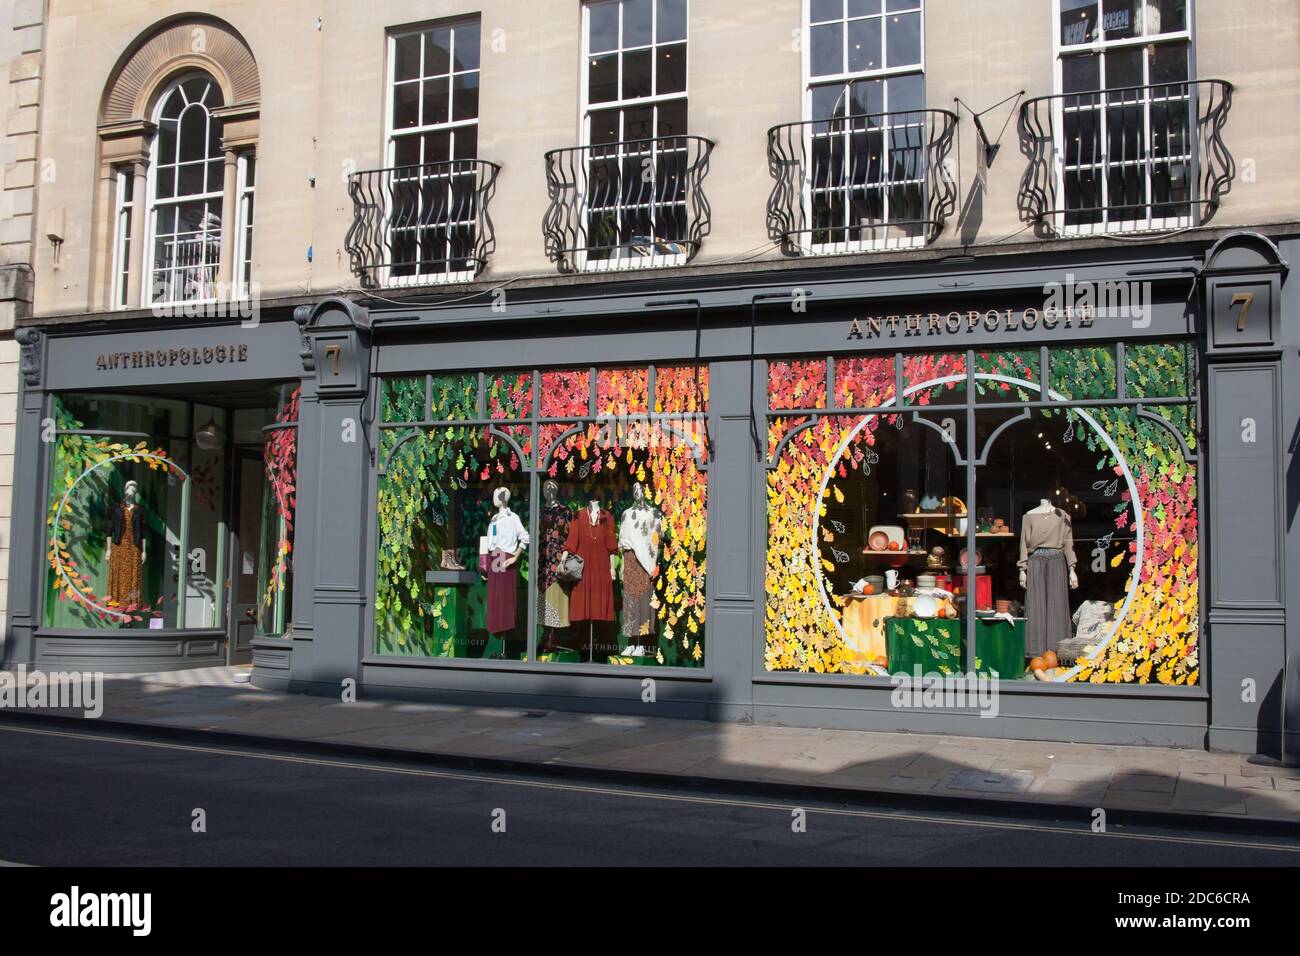 The retail shop Anthropologie in Oxford ...